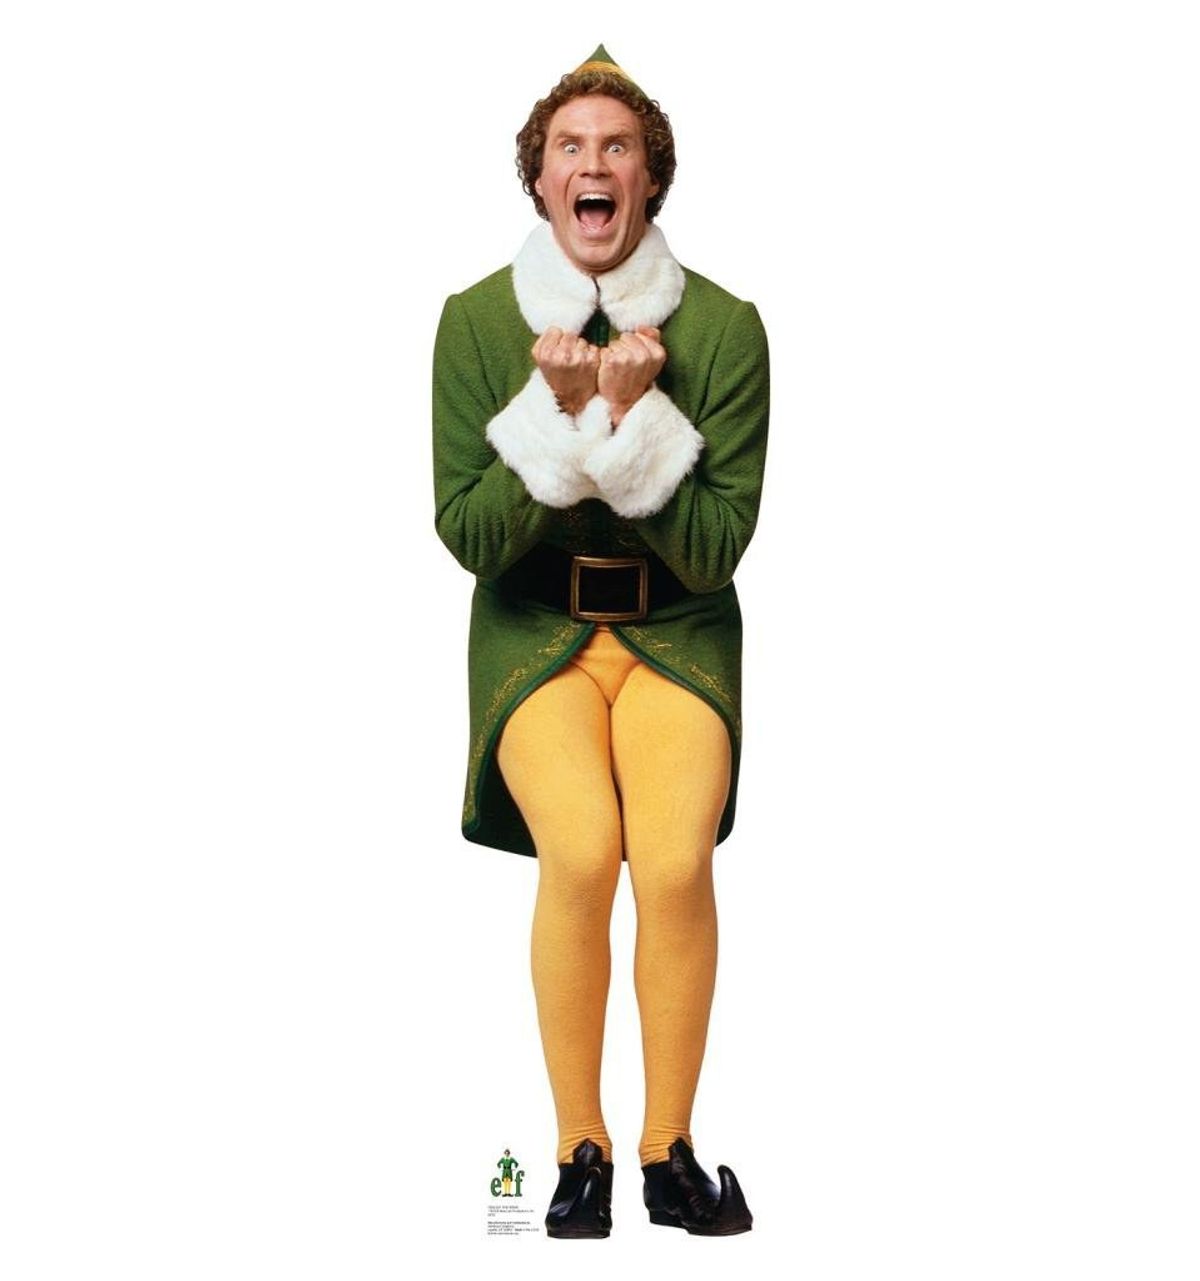 Your Week Of Finals Told By Buddy The Elf